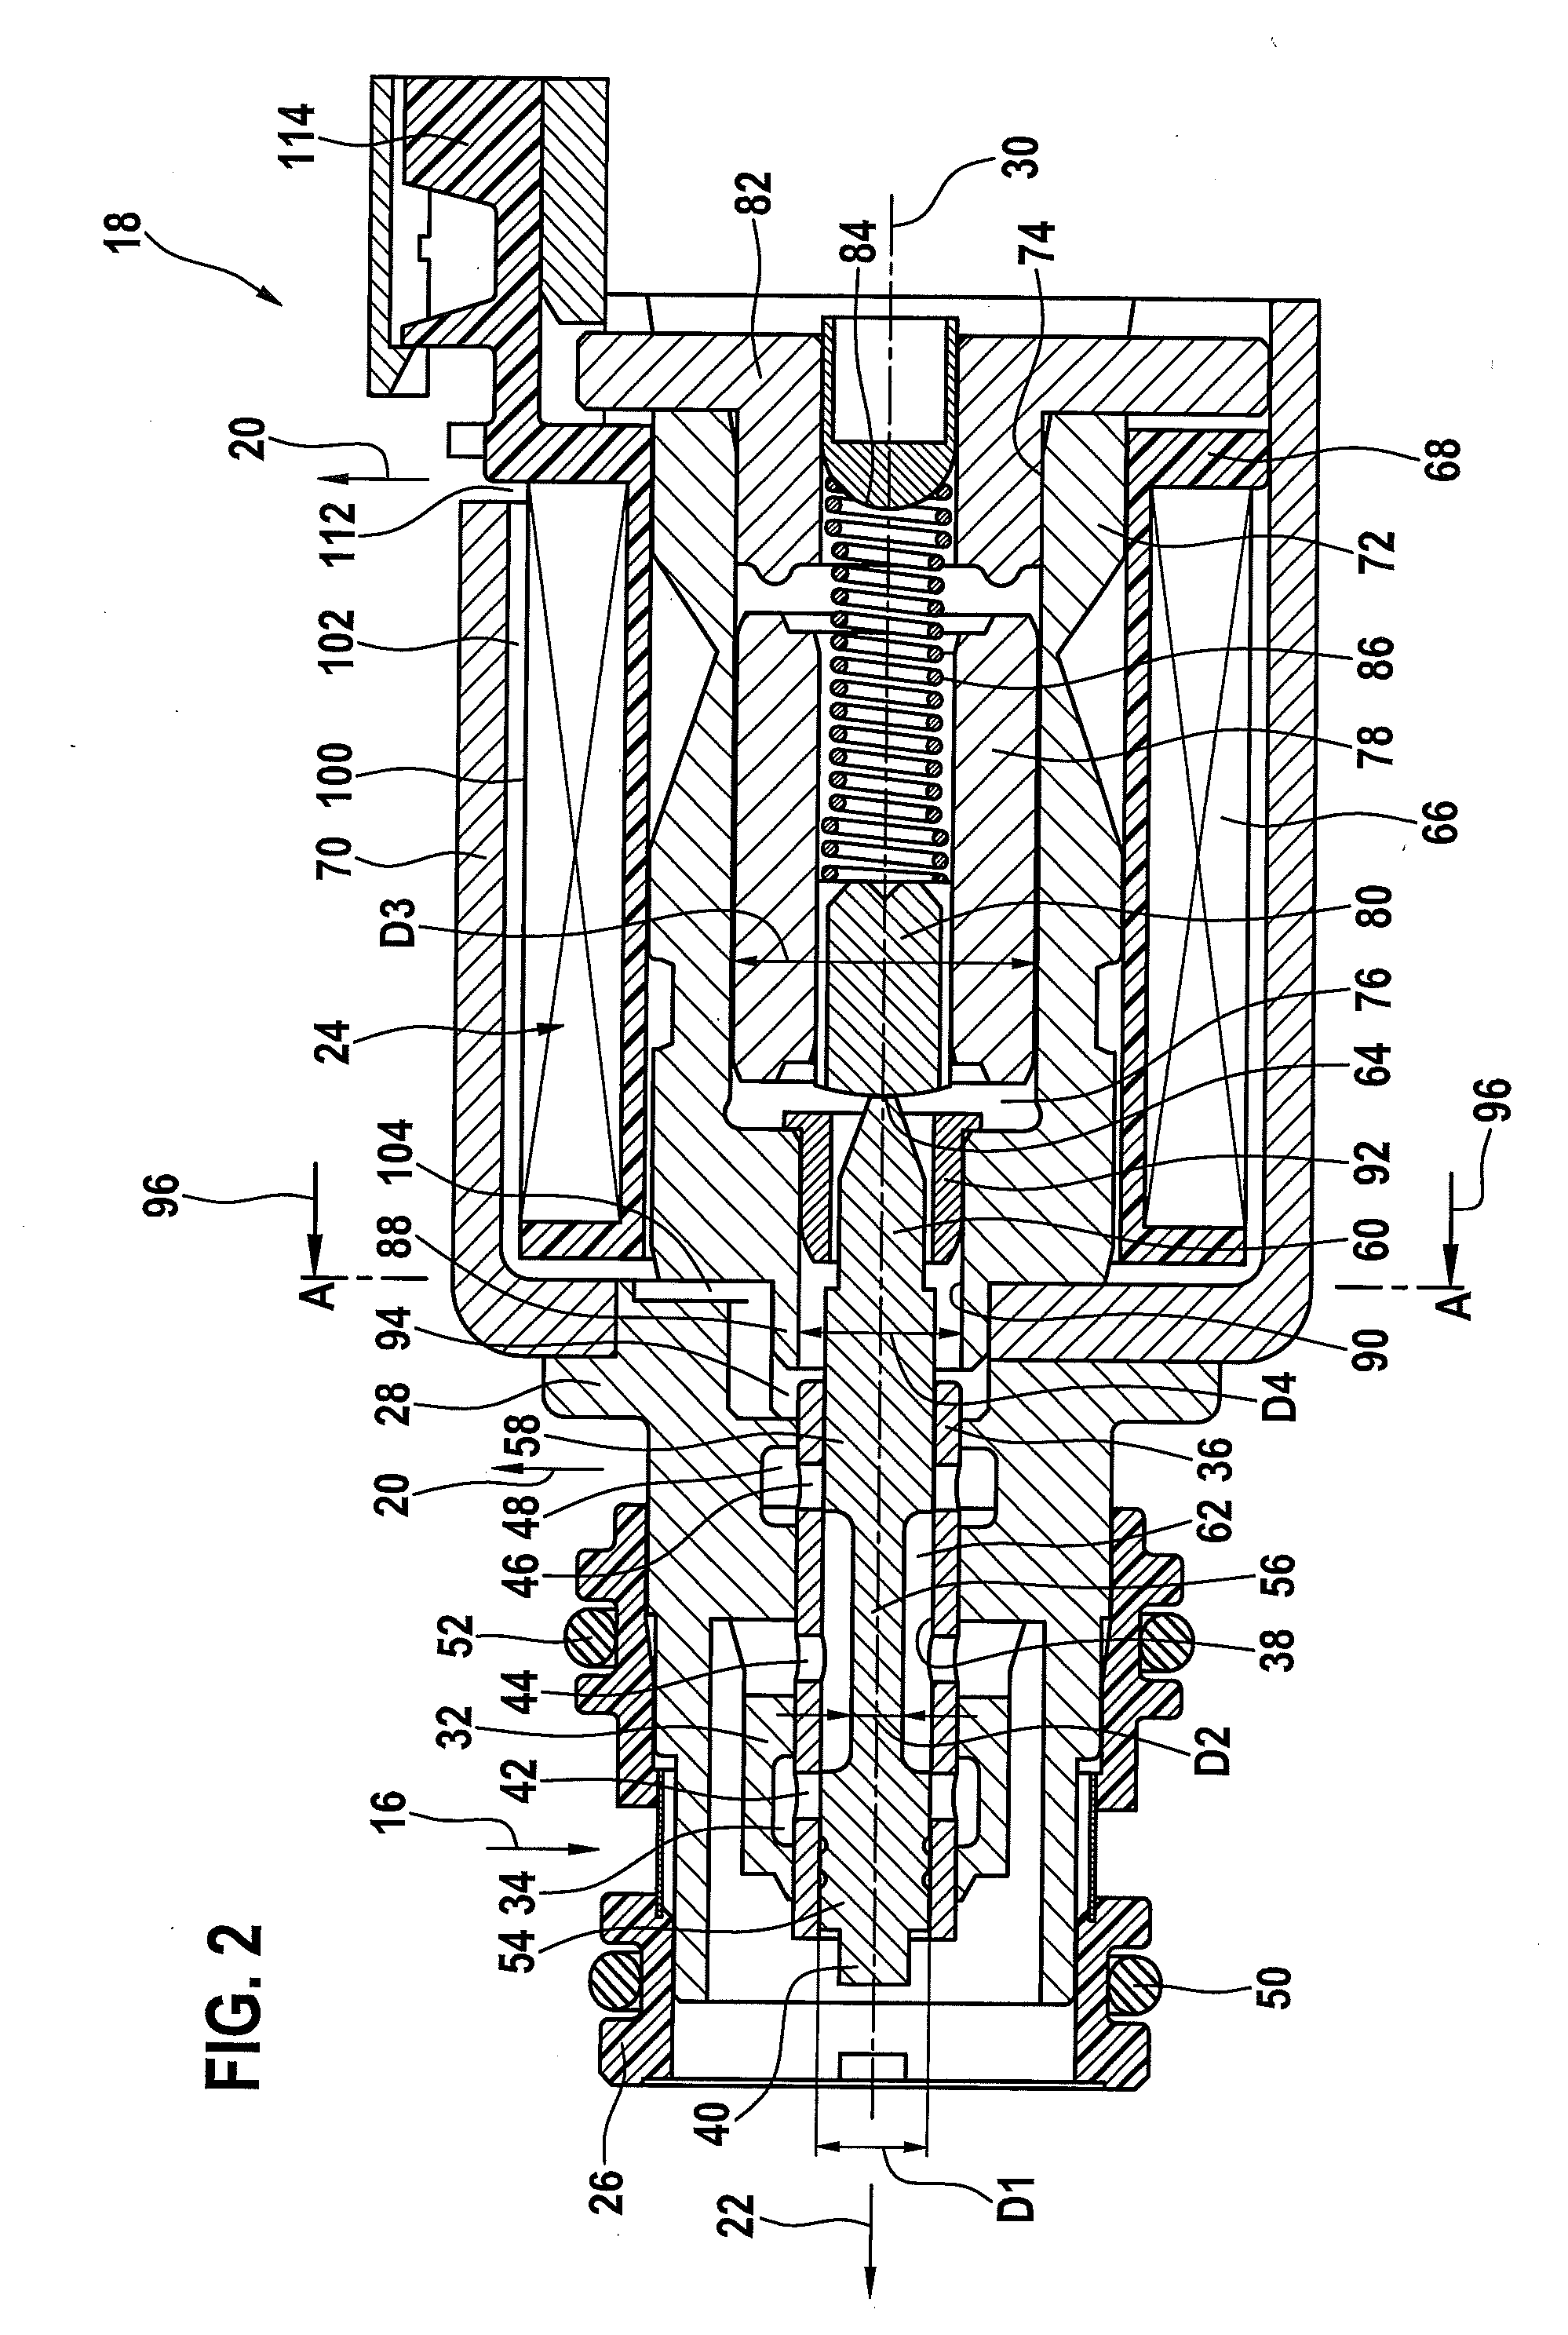 Pressure control valve including a compensating chamber